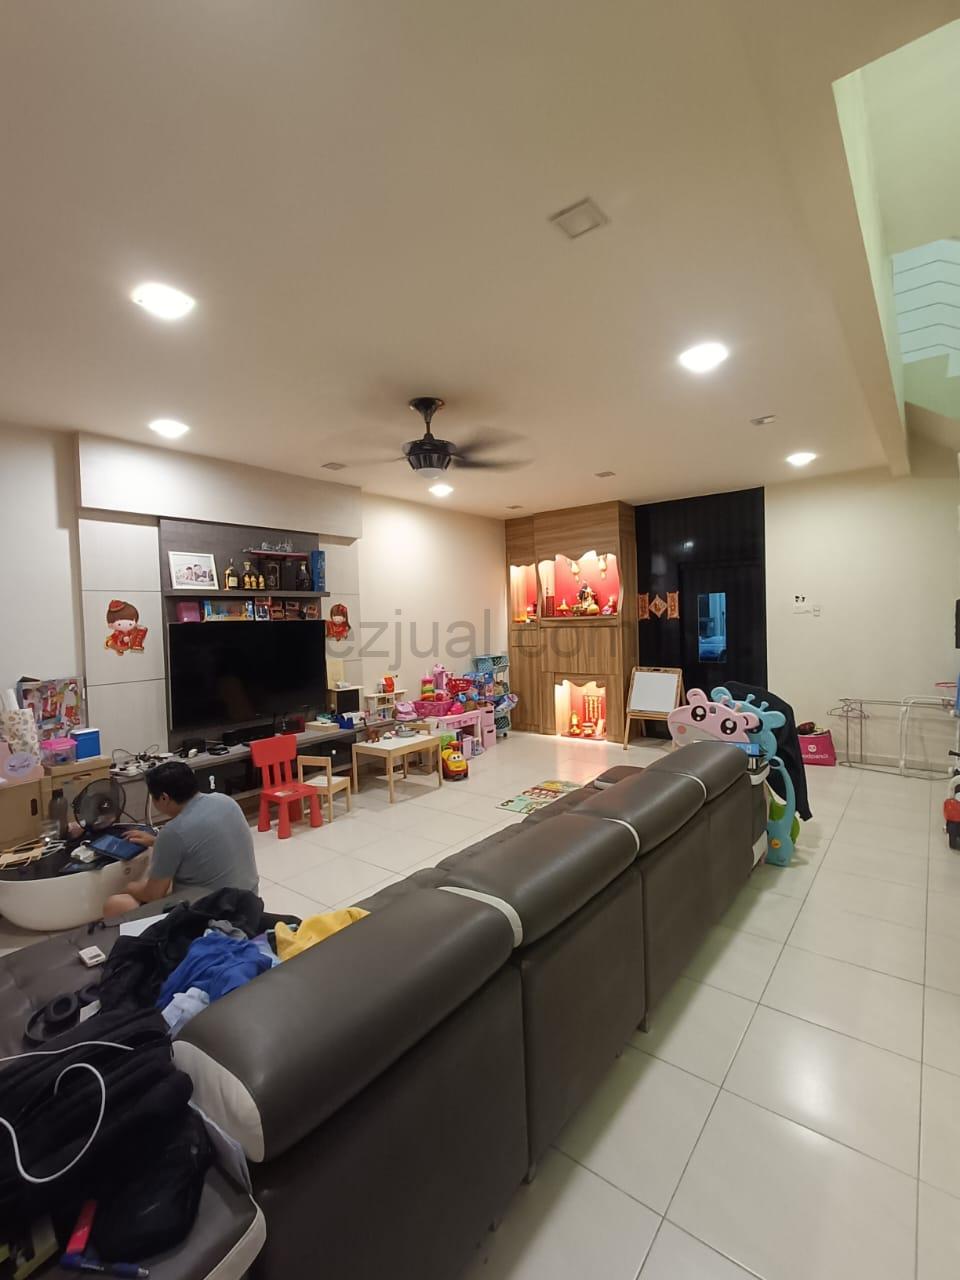 Tmn Nusa Sentral 2-stry Renovated House For Sale (Facing South n G&G)